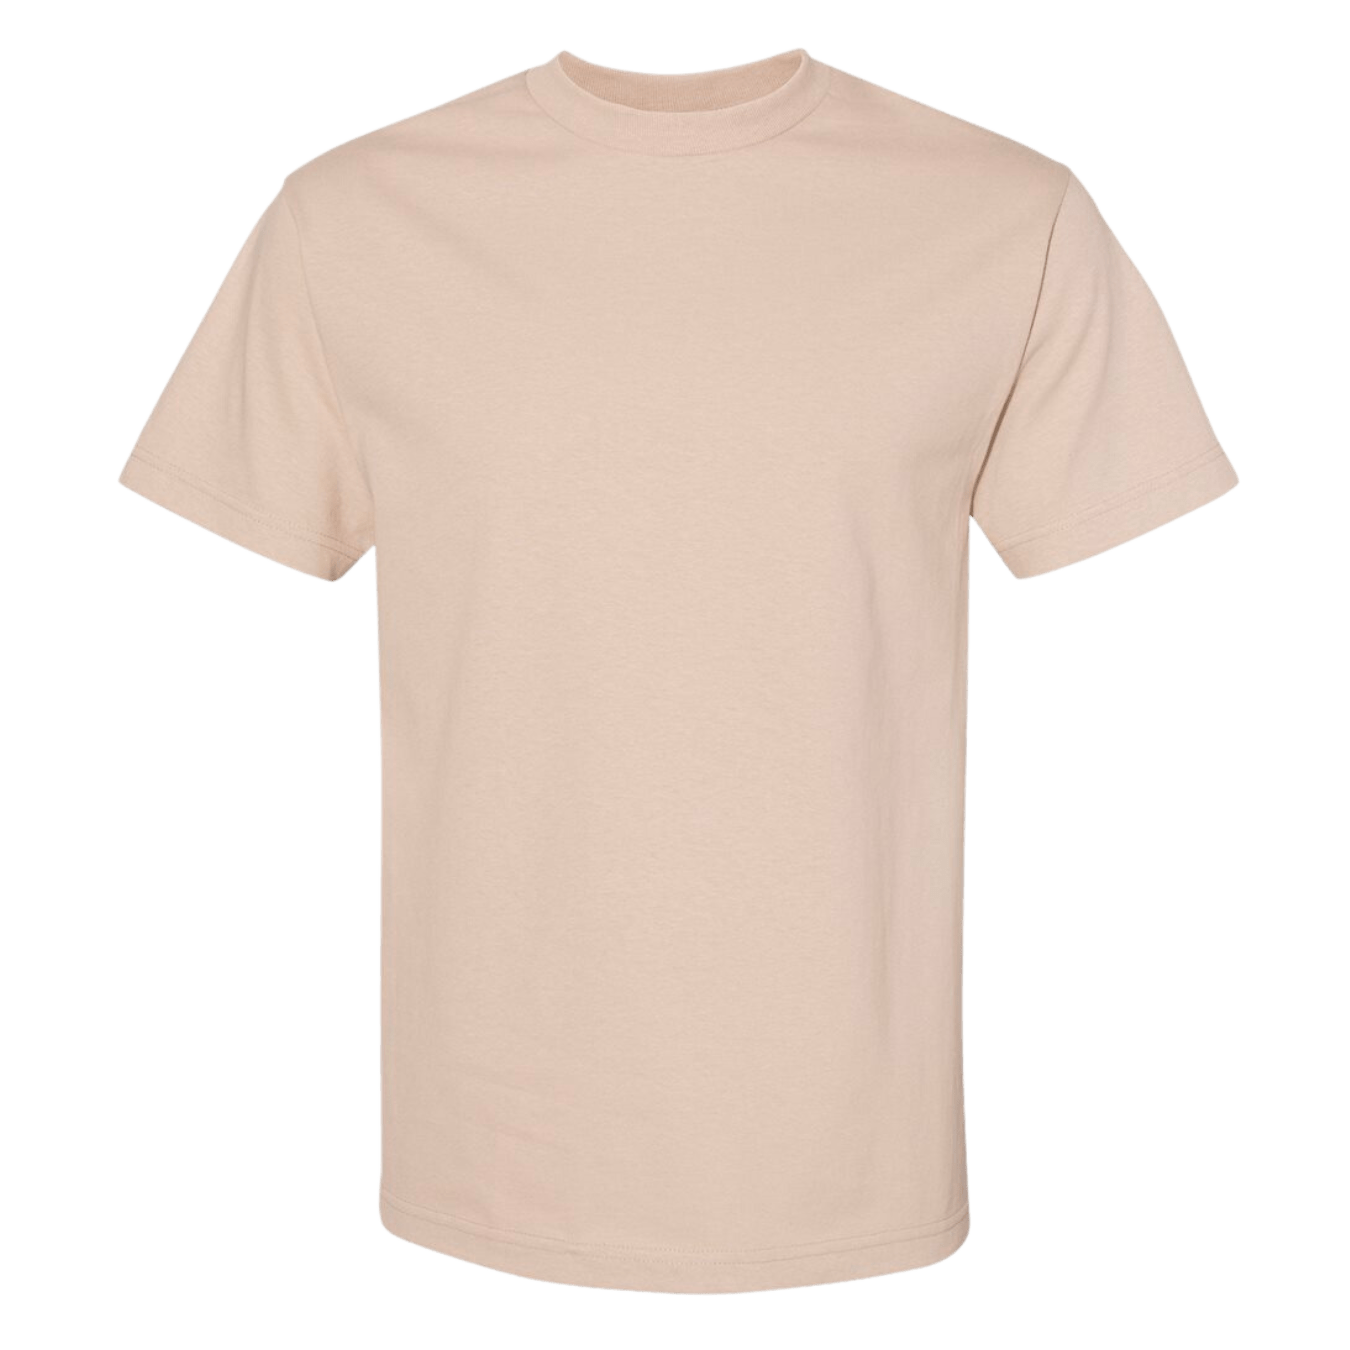 American Apparel - Heavyweight Cotton Tee - BY Print